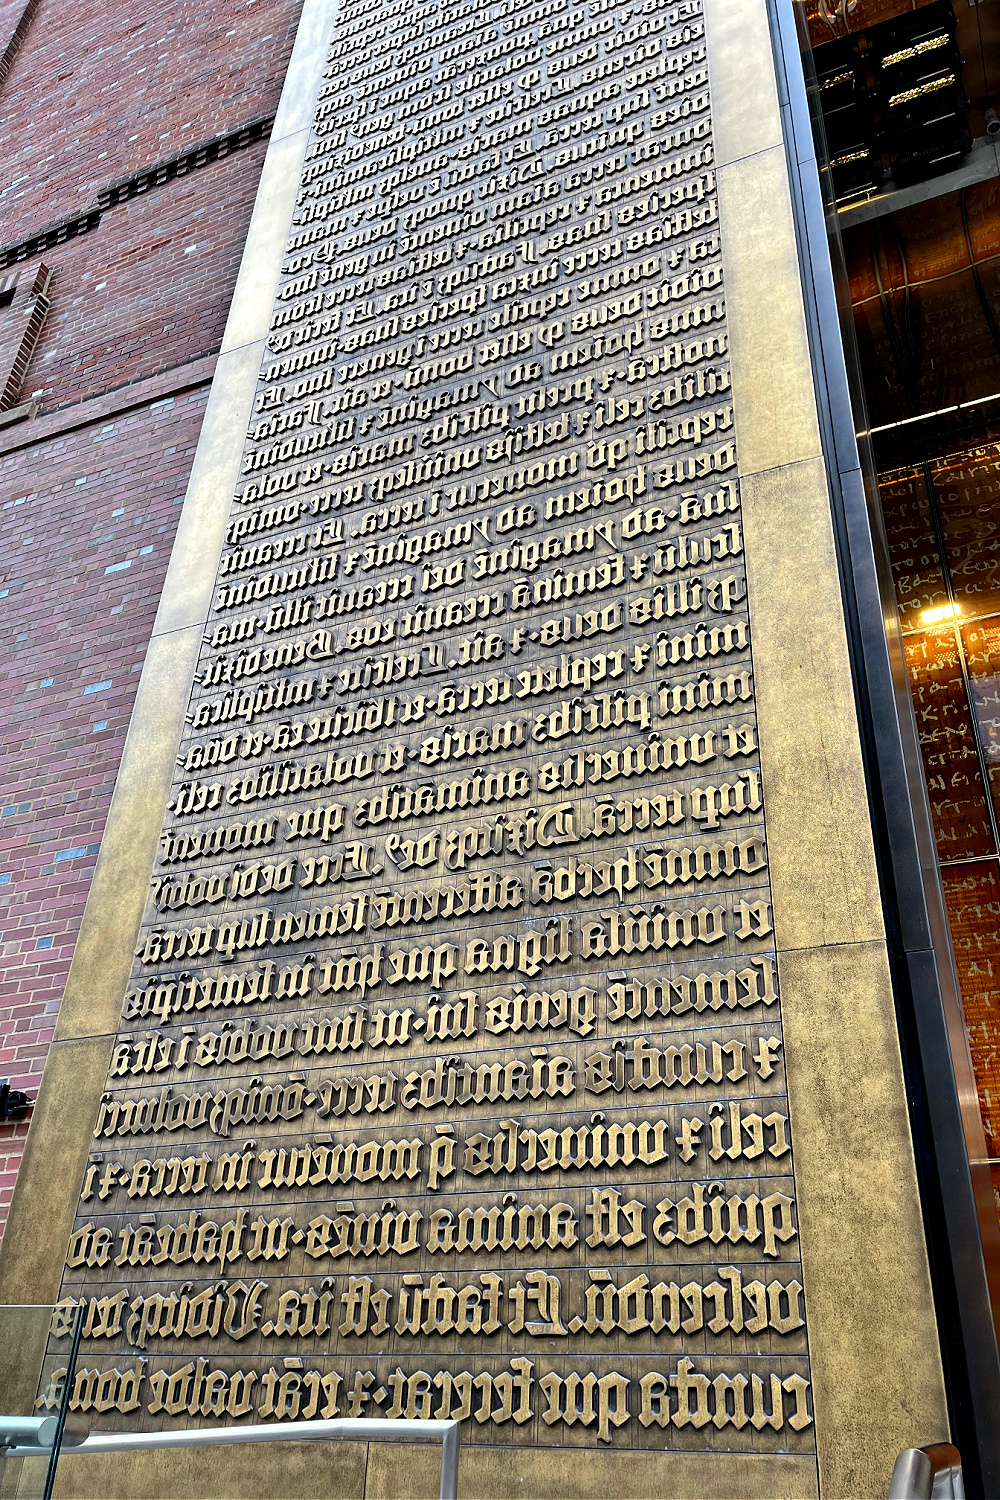 Museum of the Bible 40-foot bronze gates whose panels contain the first 80 lines of Genesis written in Latin originally printed in an early edition of the Gutenberg Bible.